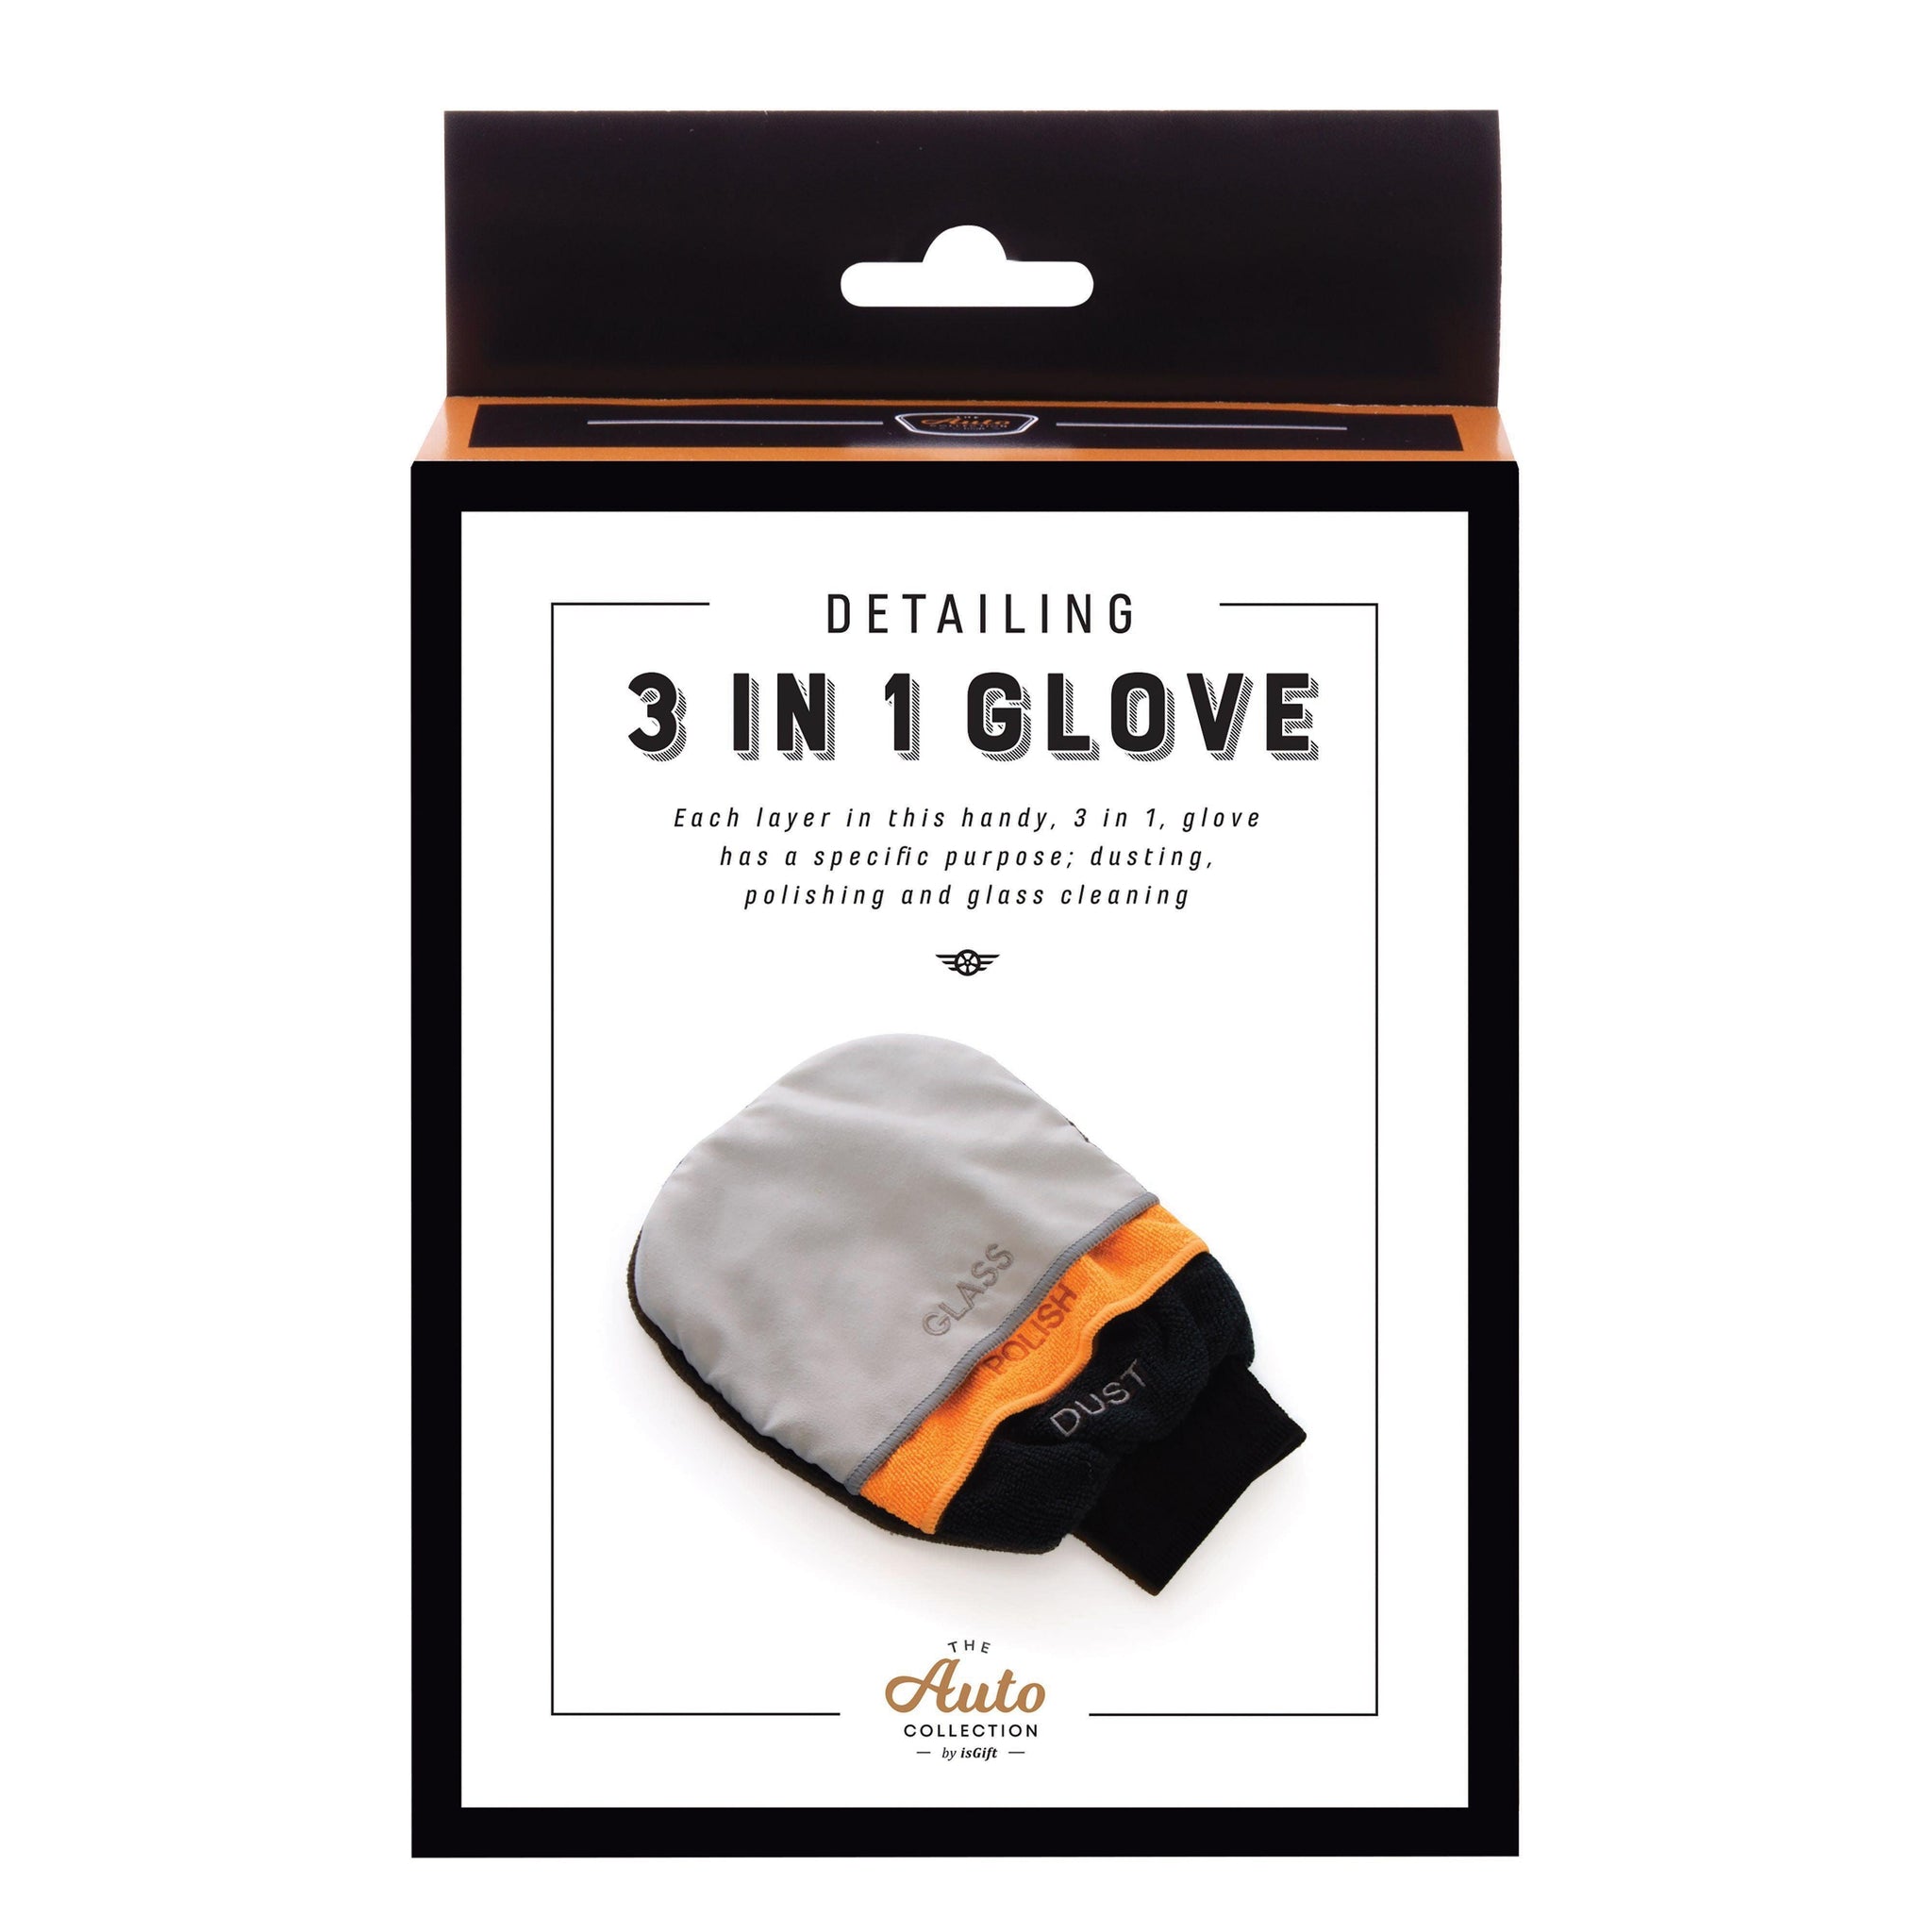 Detailing 3 in 1 Glove - Handworks Nouveau Paperie